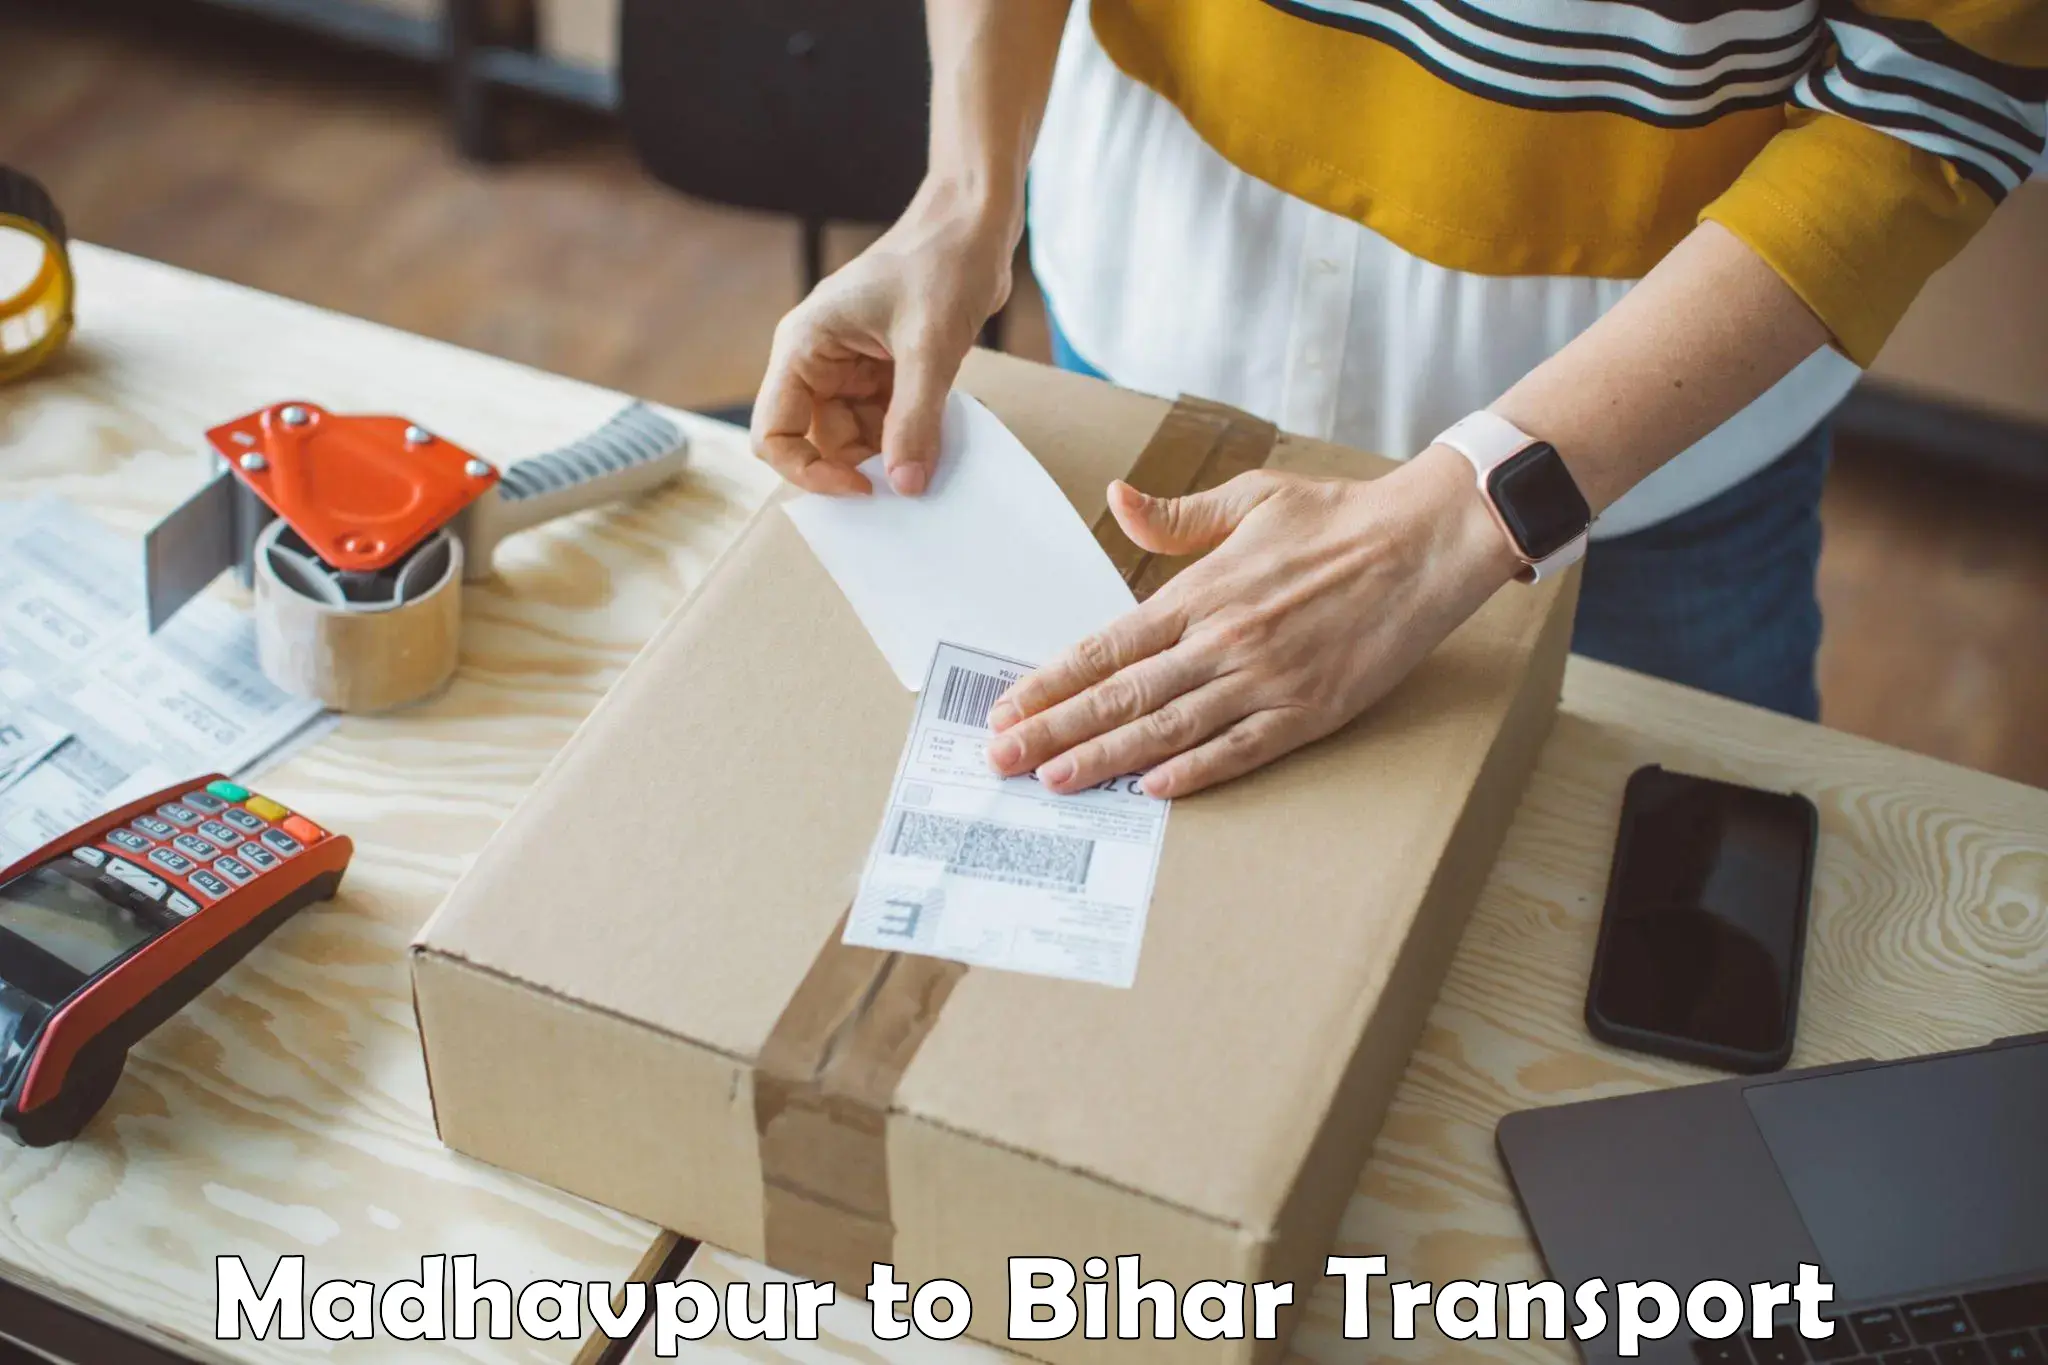 Truck transport companies in India Madhavpur to Makhdumpur